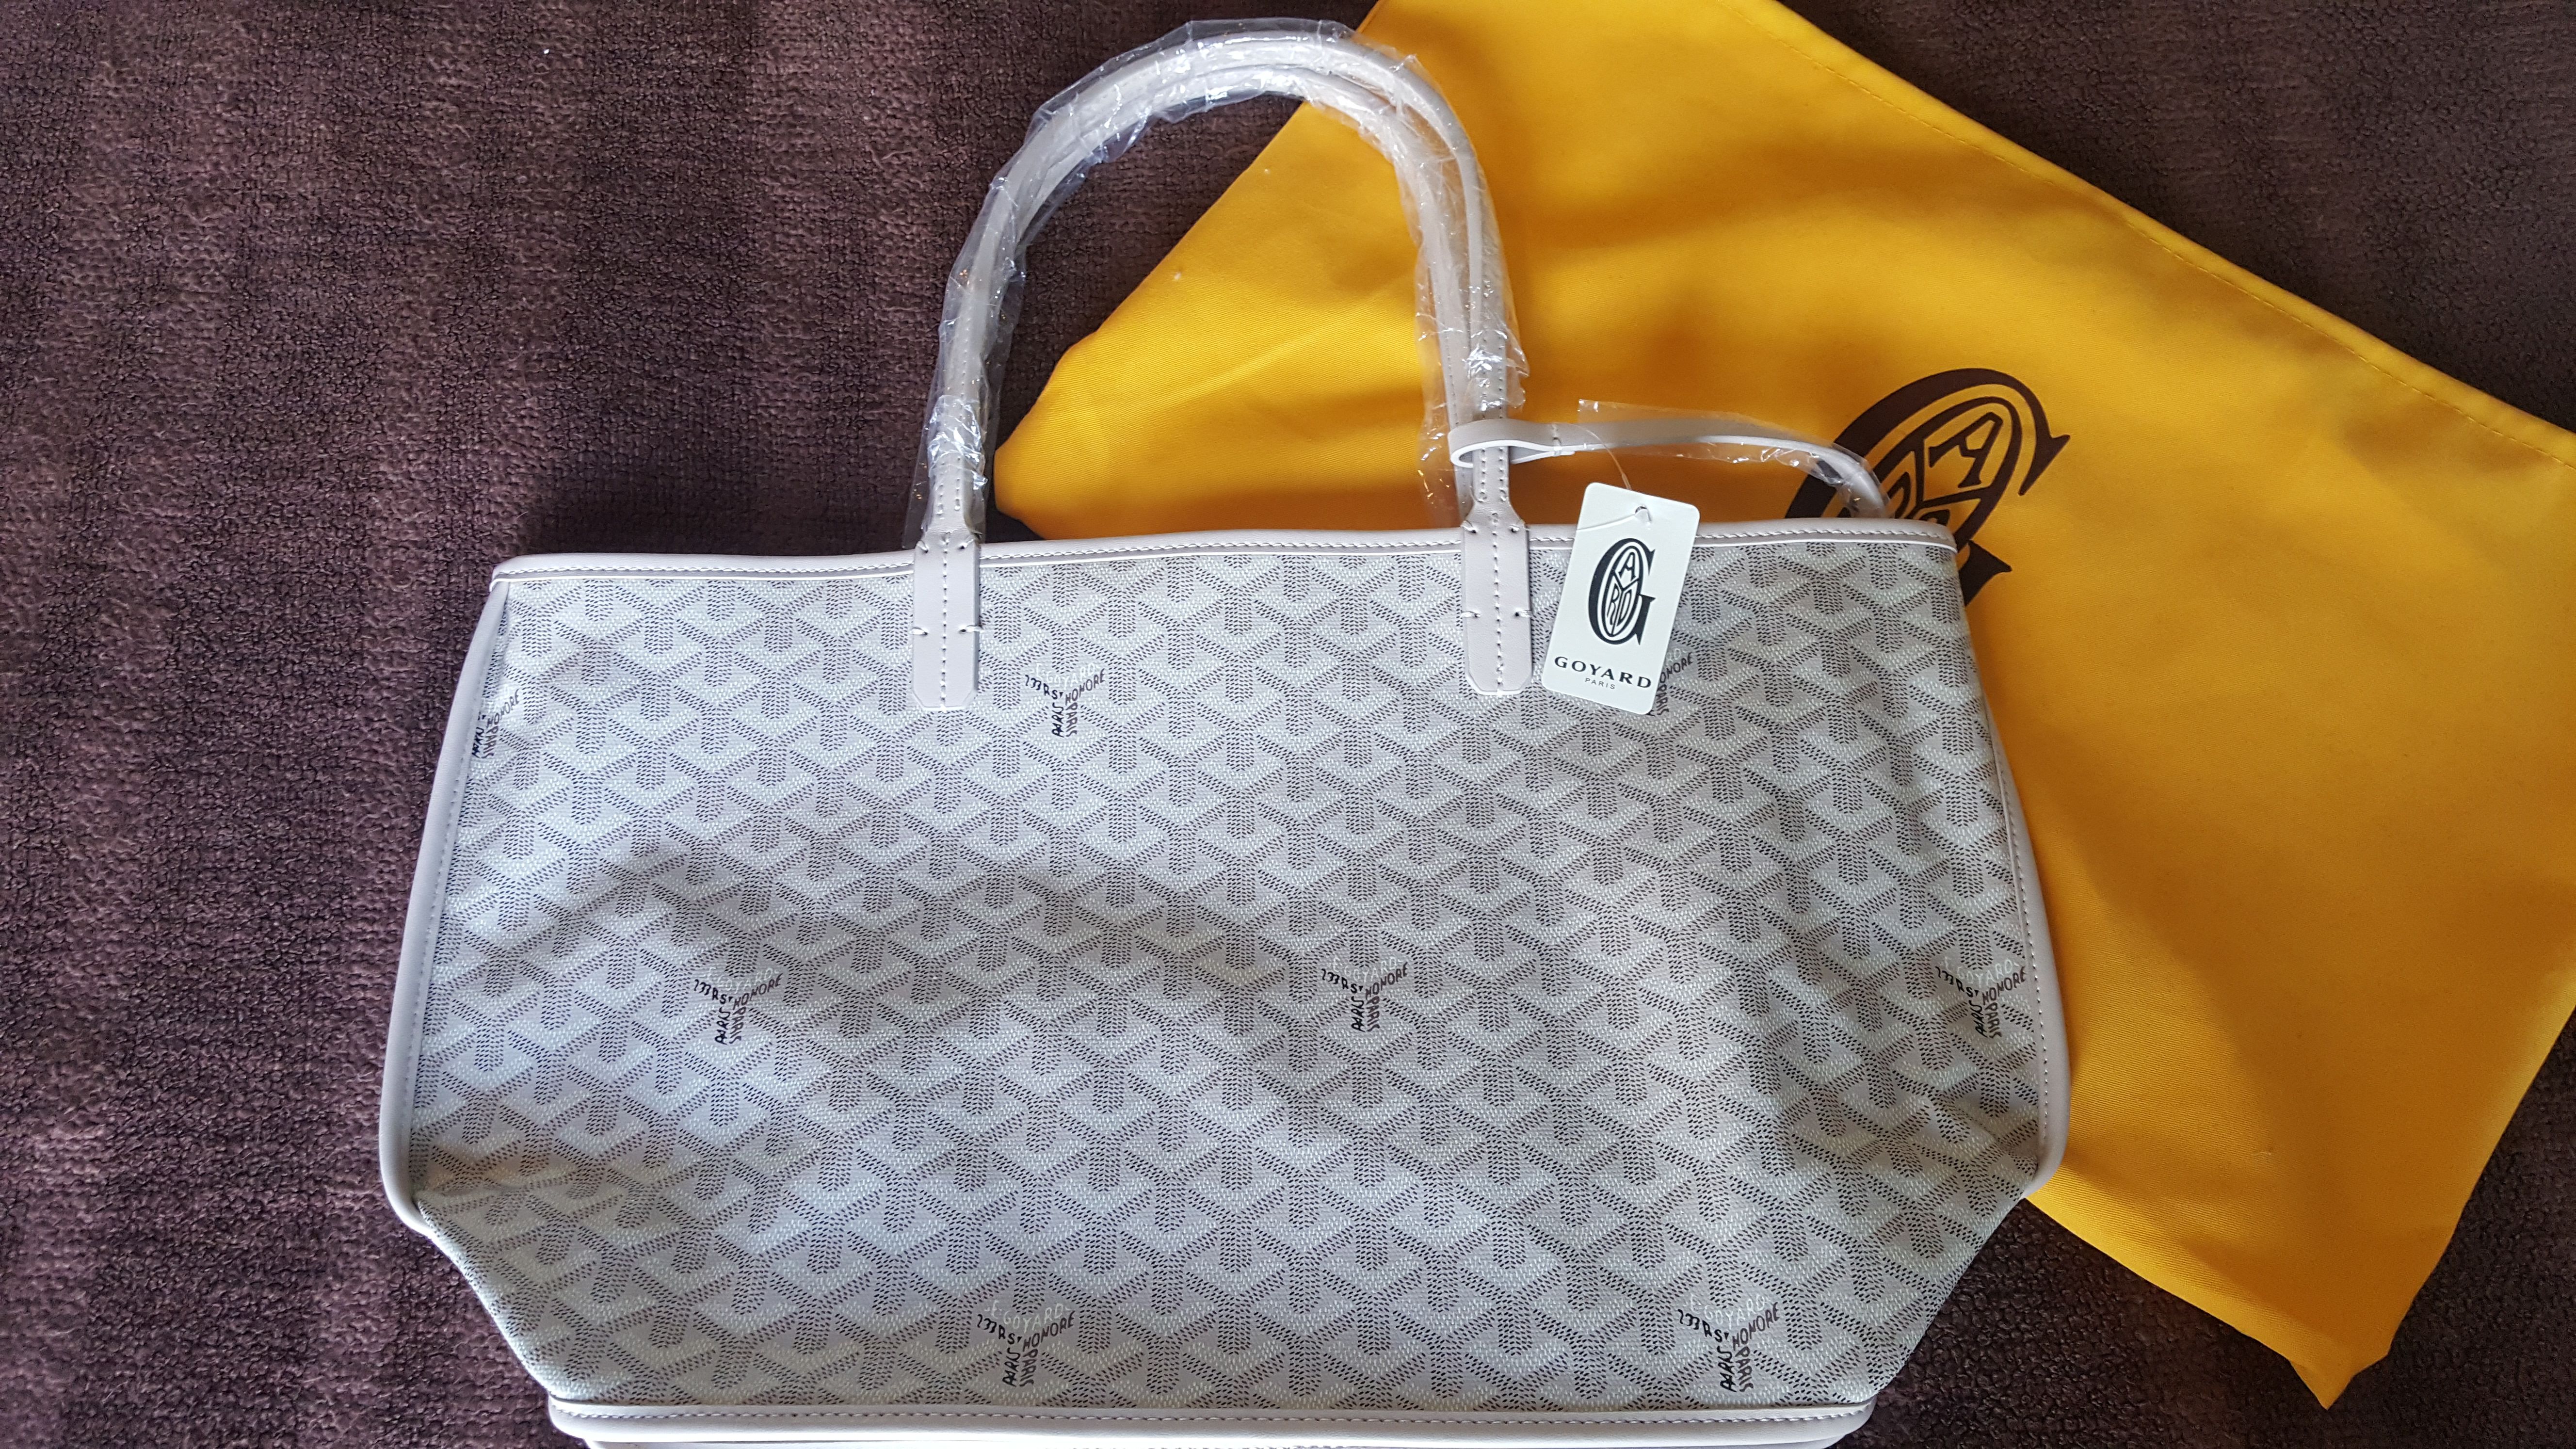 Louis Vuitton Neverfull Pm Tote Bag Authenticated By Lxr - Yahoo